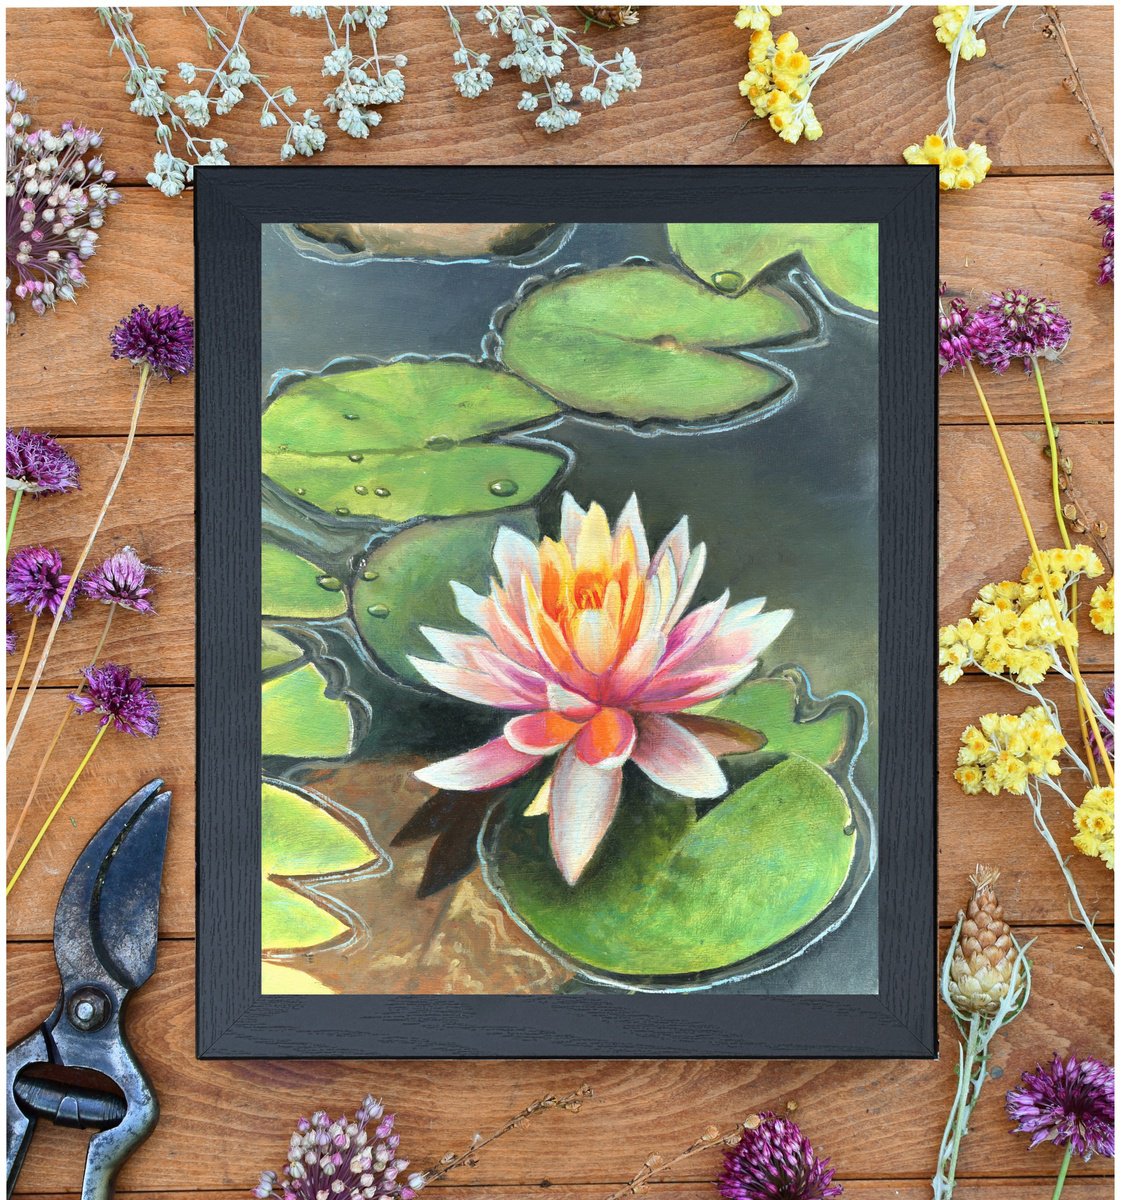 Original 16x20 oil on canvas of lily pads - Where the Lily Pads Gather  by Joanne Lepicek — Joanne Lepicek Art